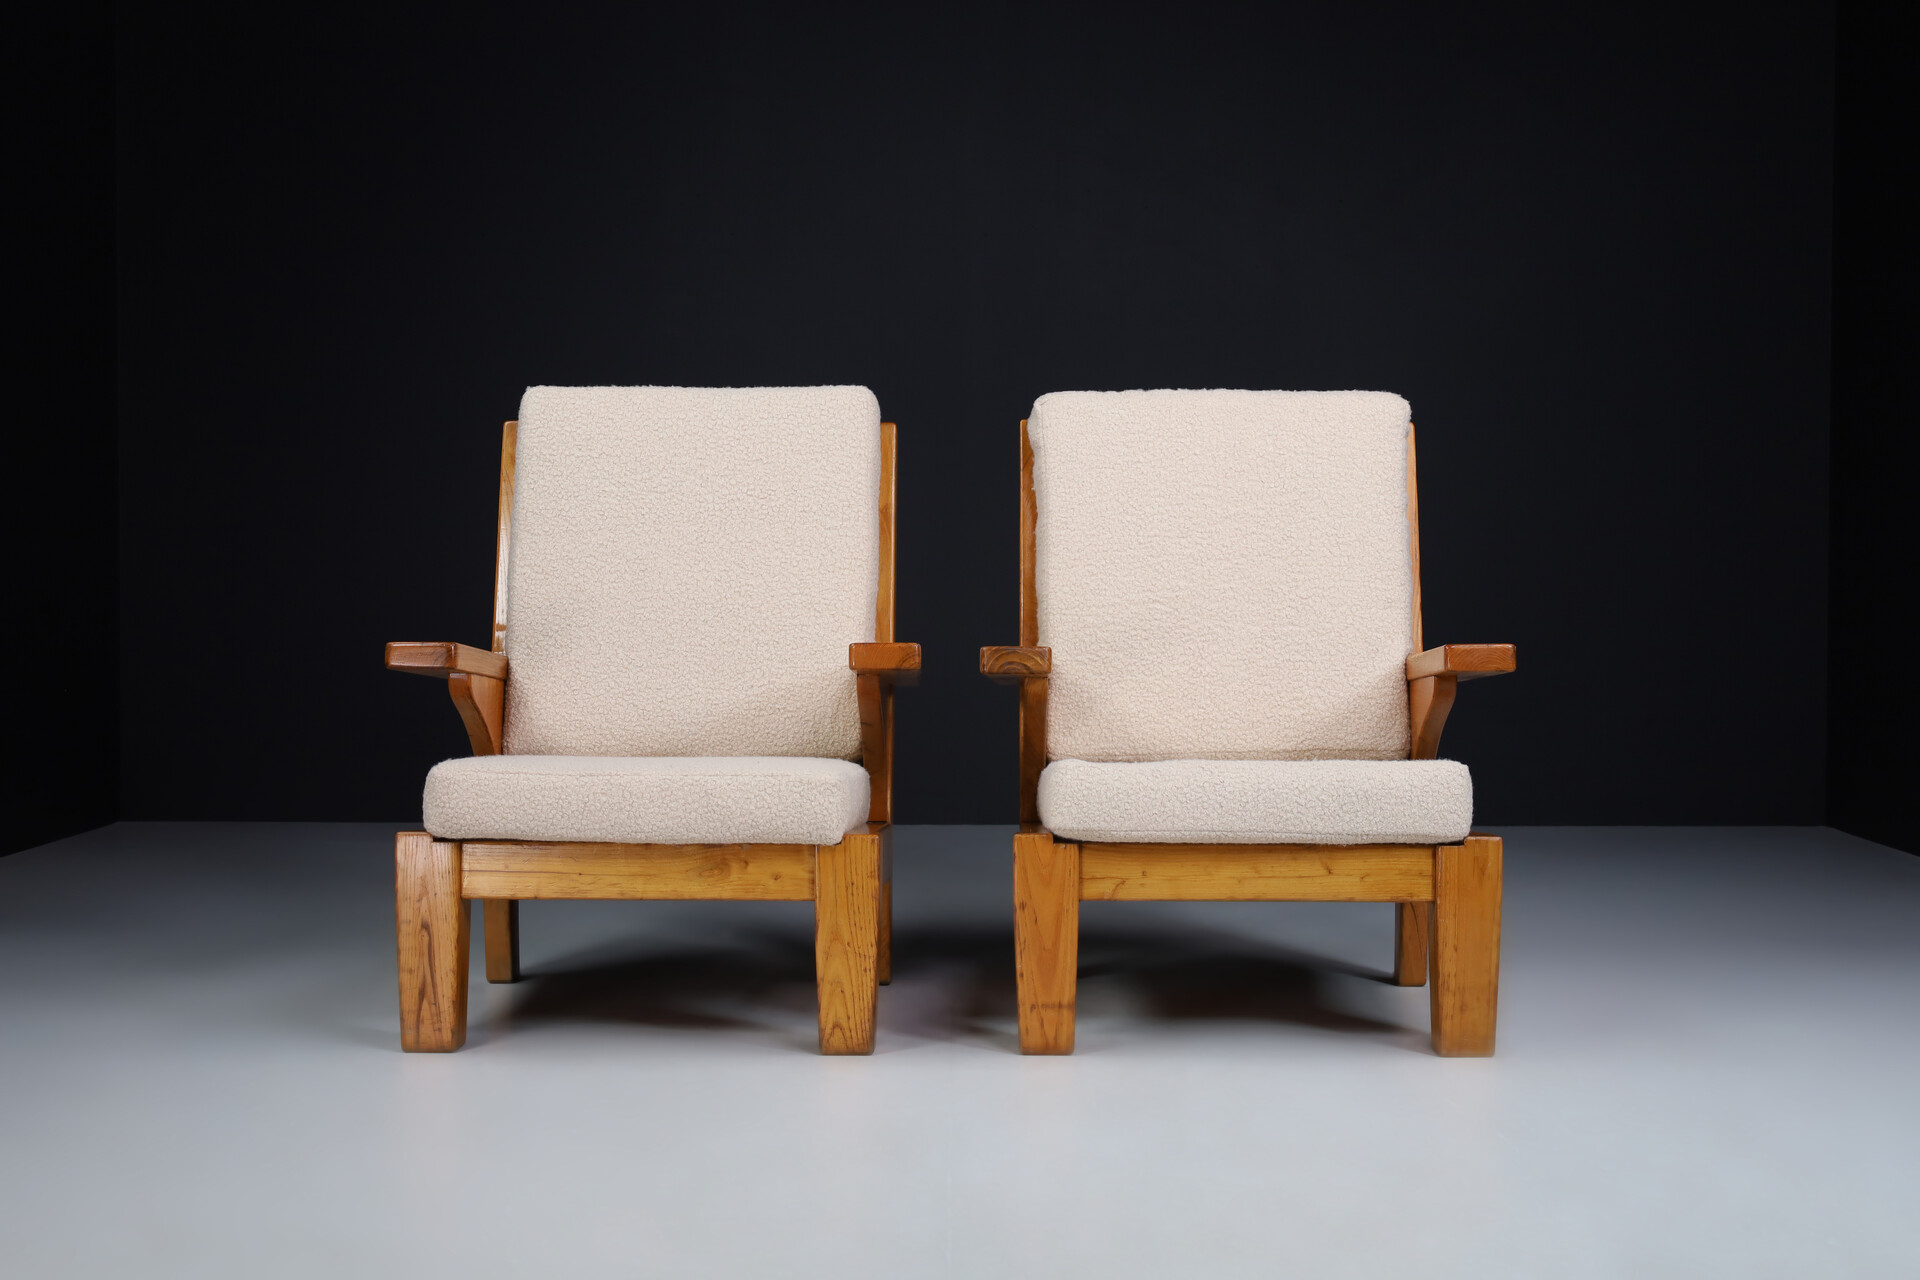 Mid century modern Sculptural lounge Chairs / Arm chairs in oak , Spain 1950s Mid-20th century